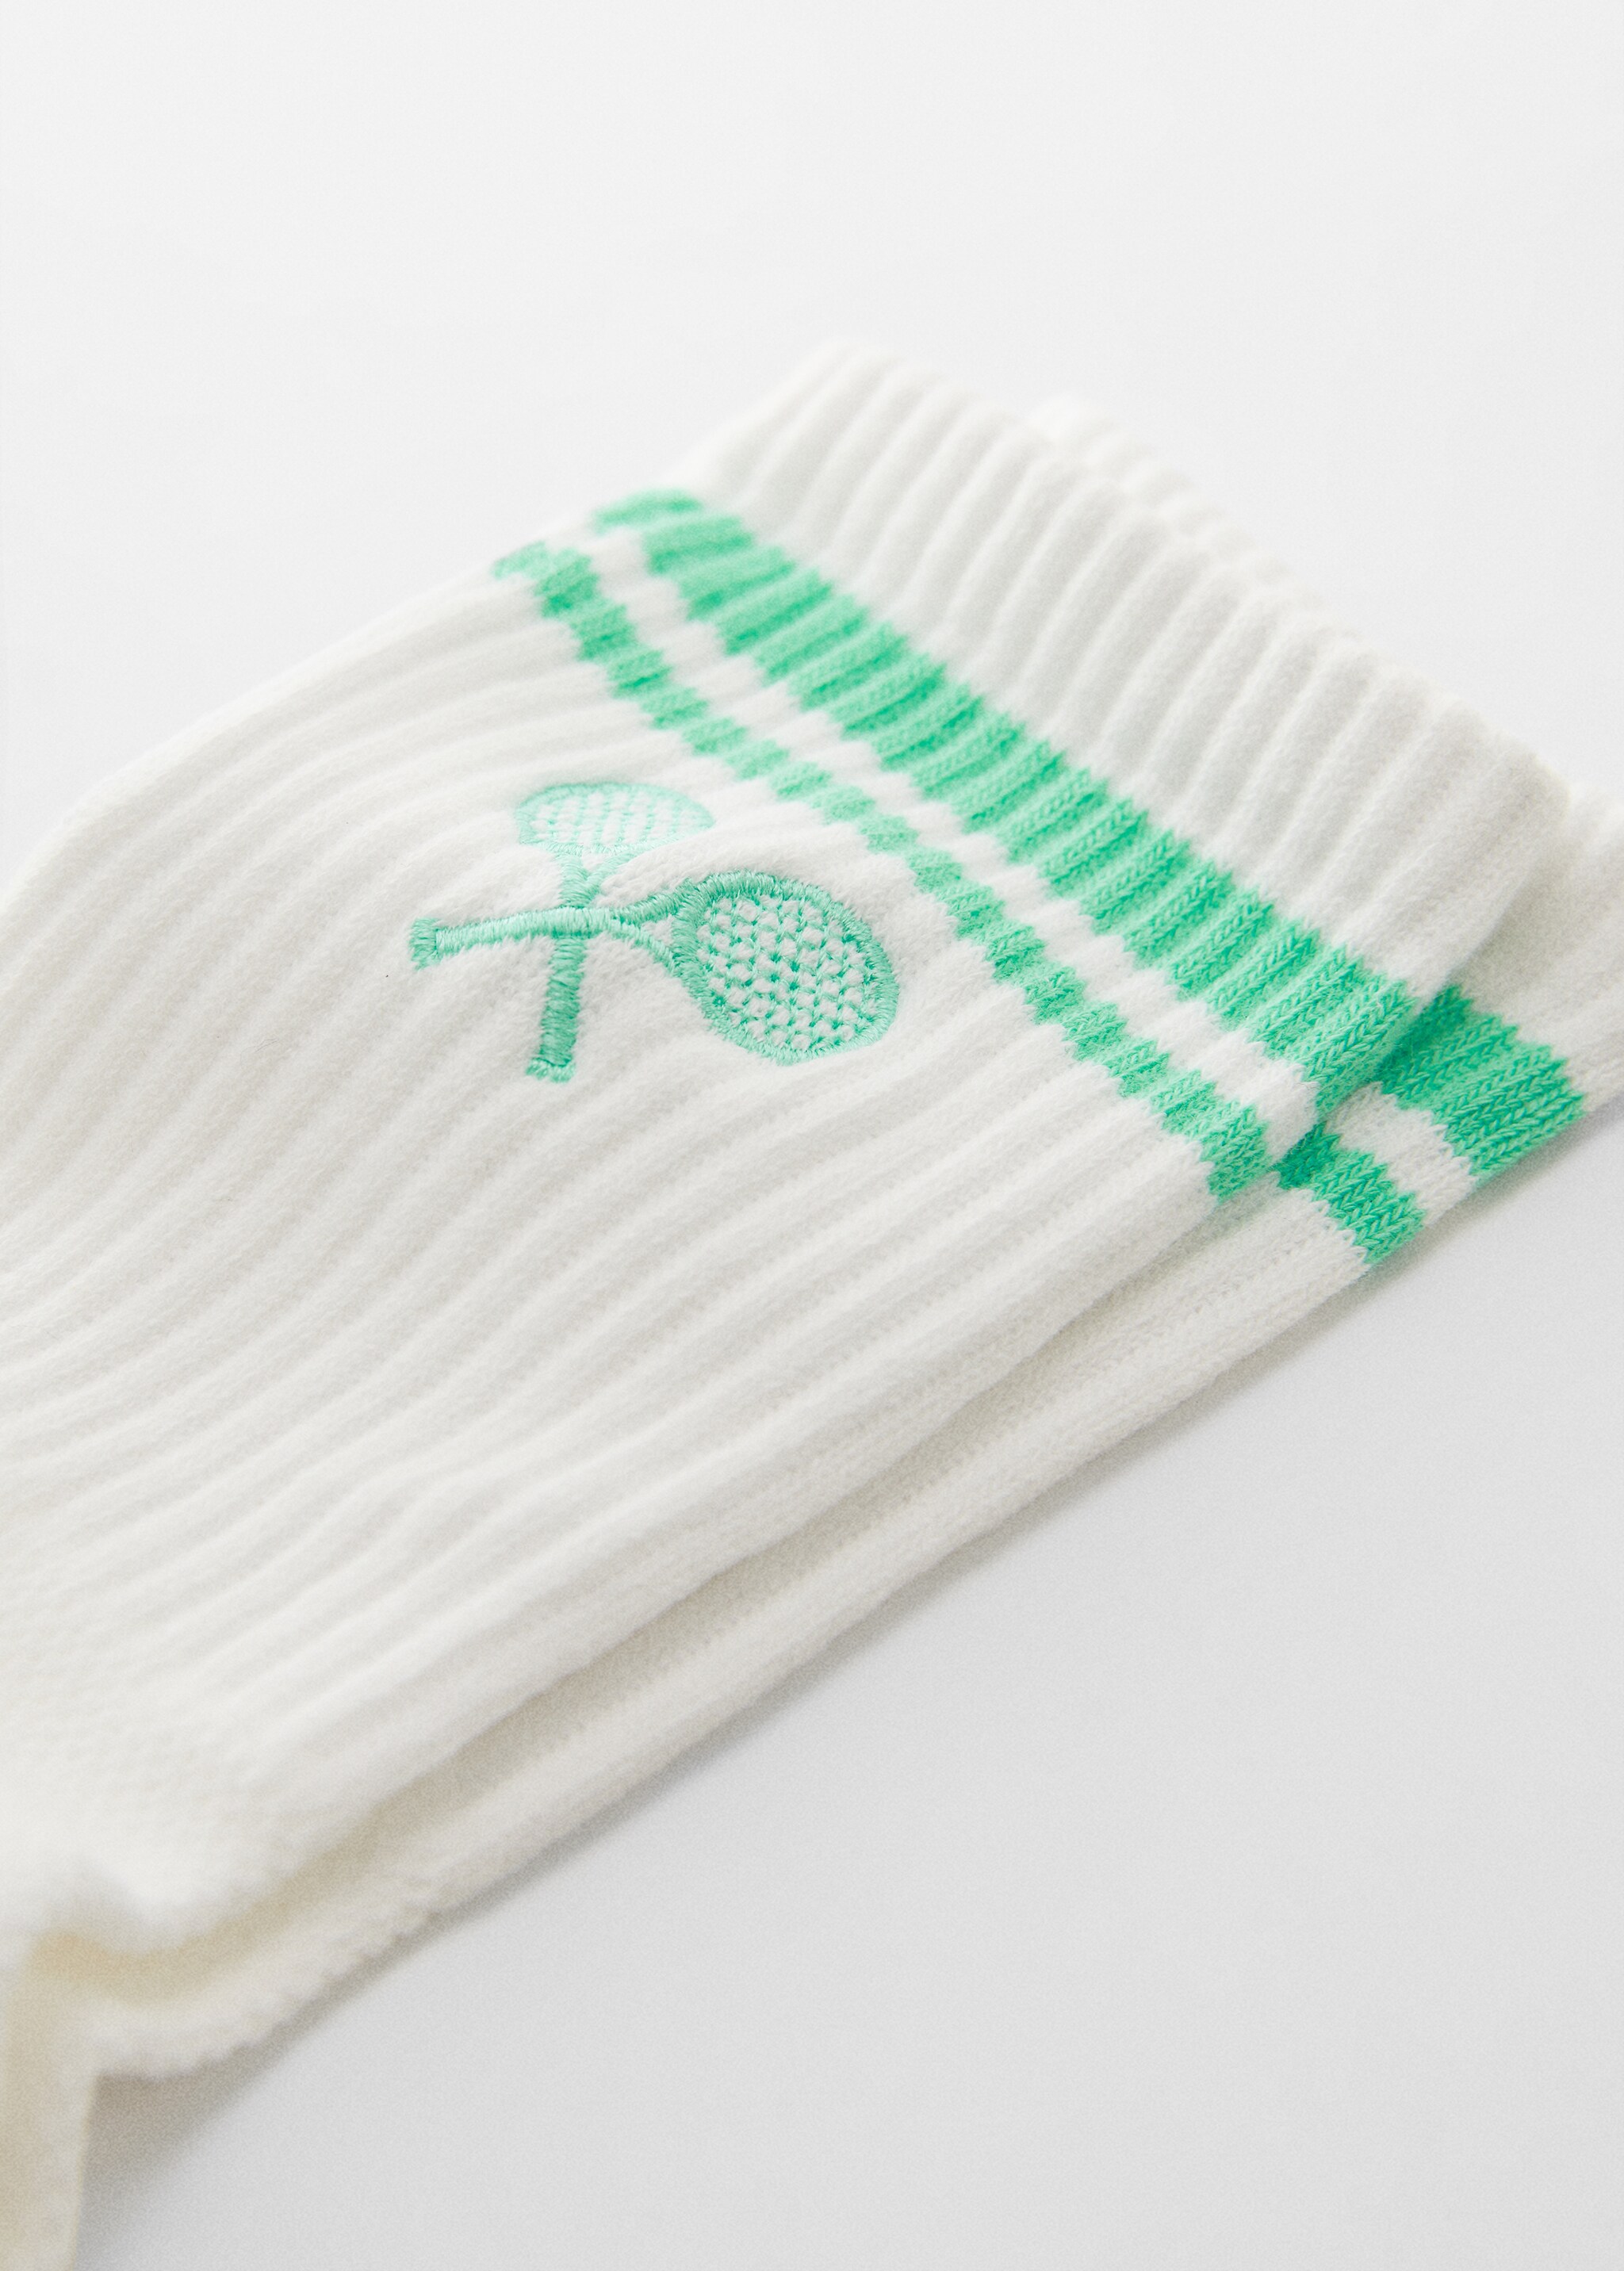 Cotton socks with embroidered detail - Medium plane